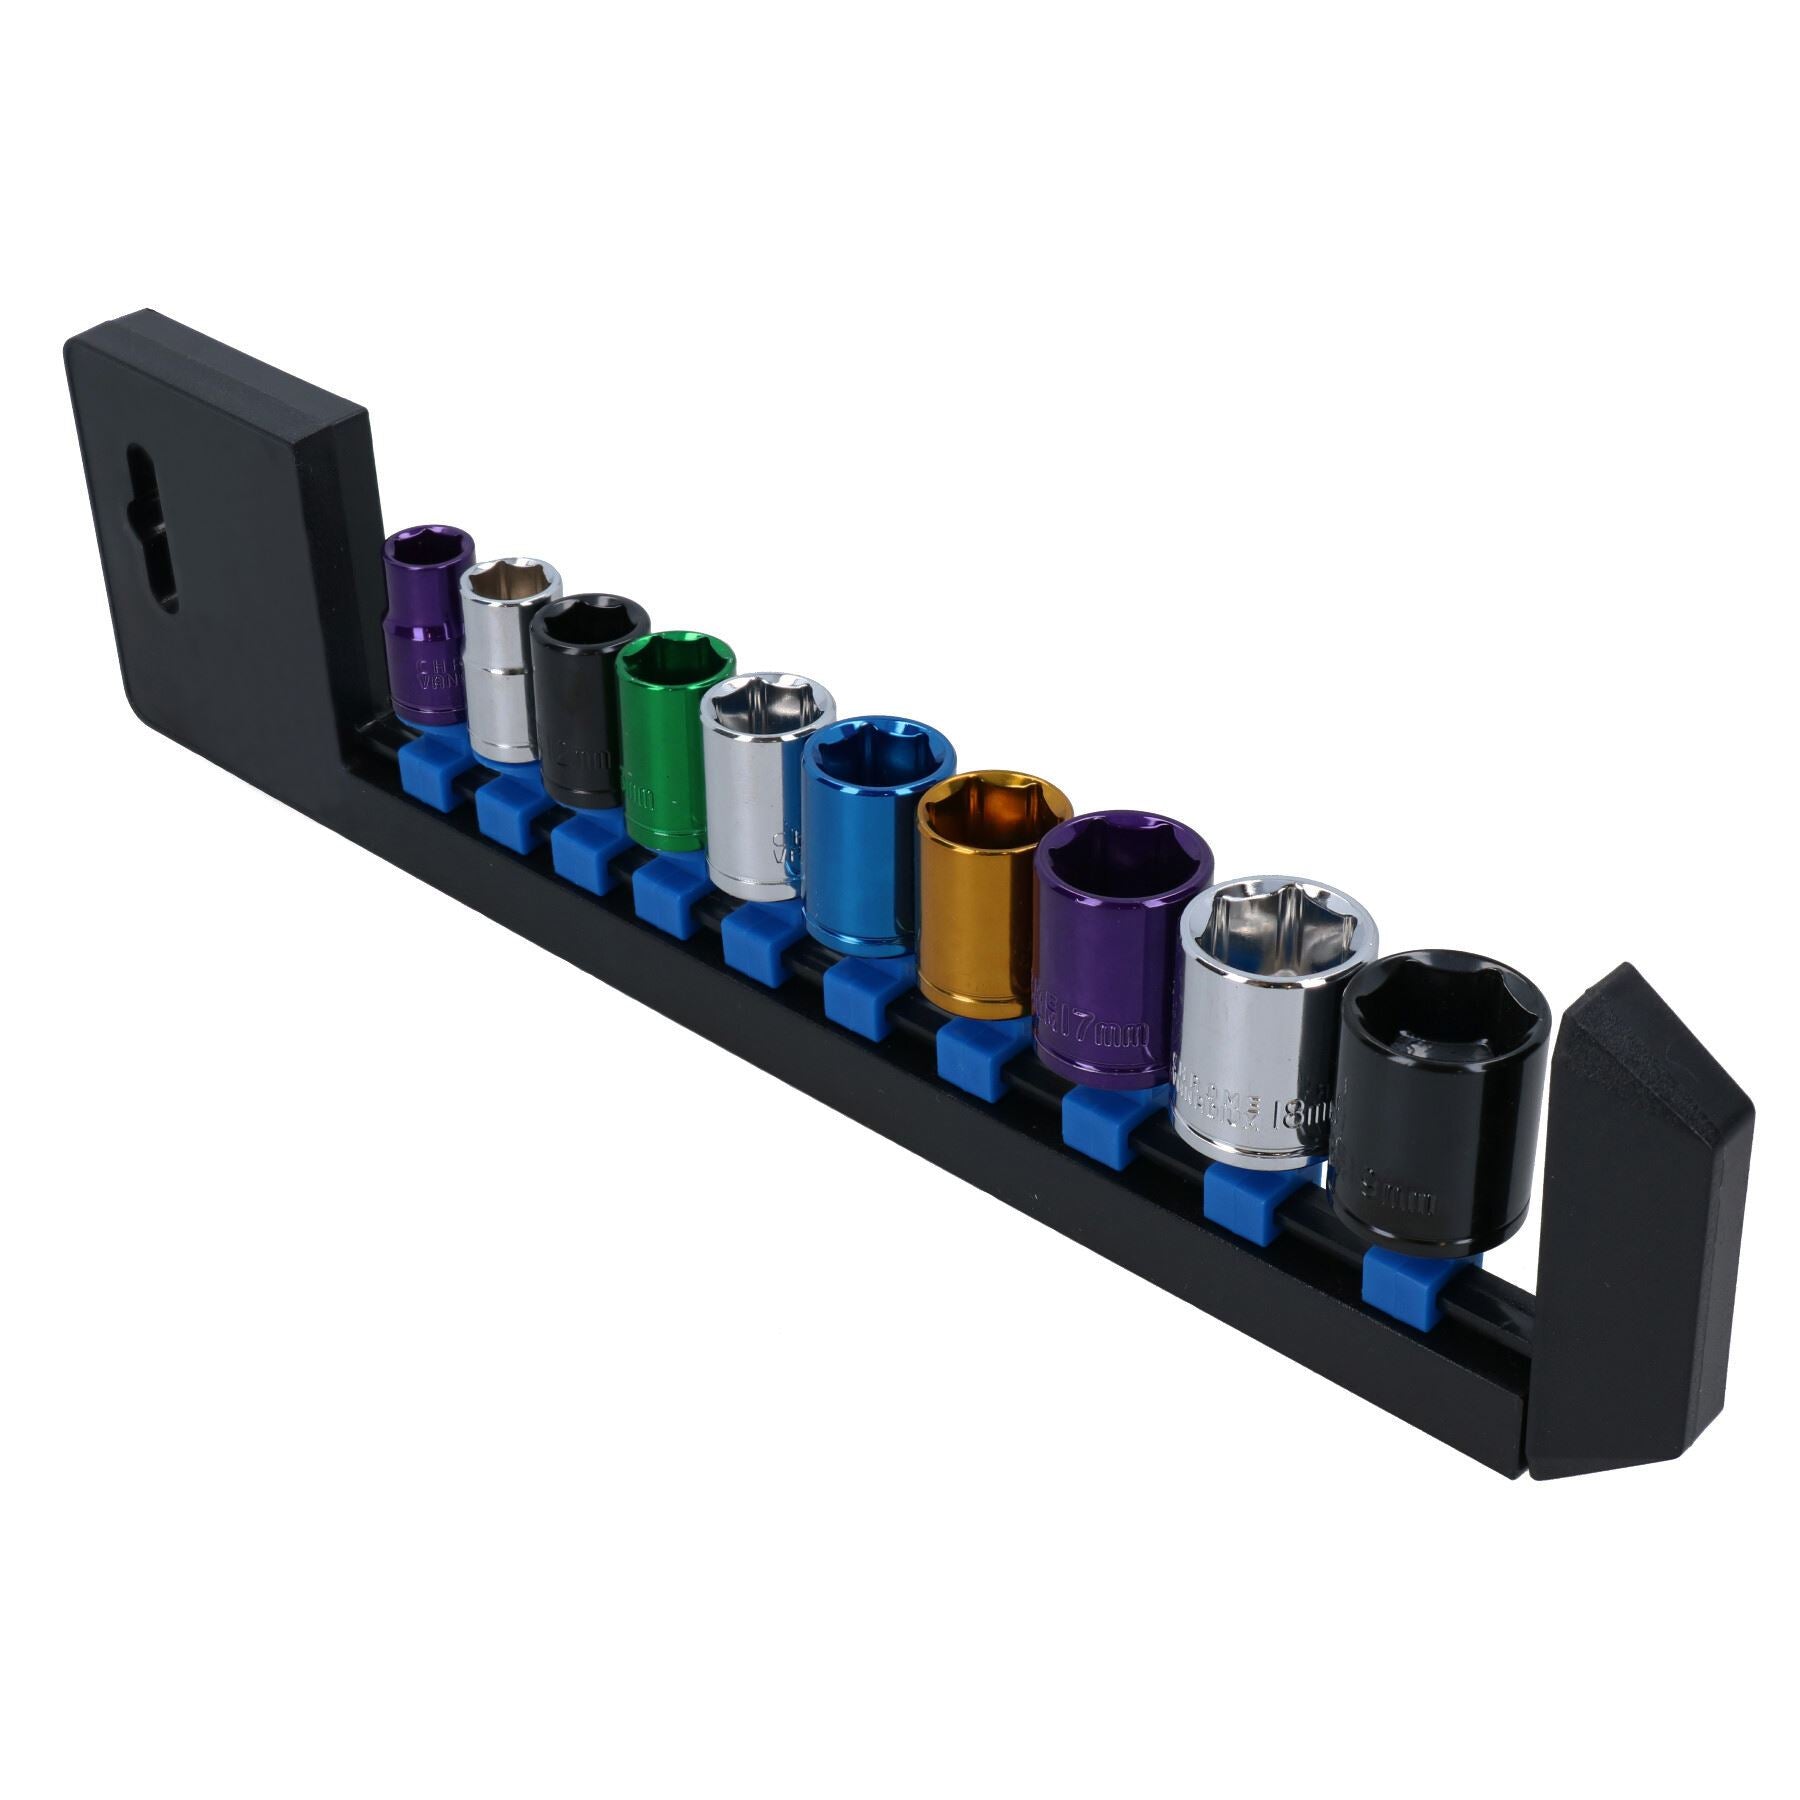 10pc Coloured 3/8" Dr Shallow Sockets 6 Point Hex Metric 10 - 19mm With Rail